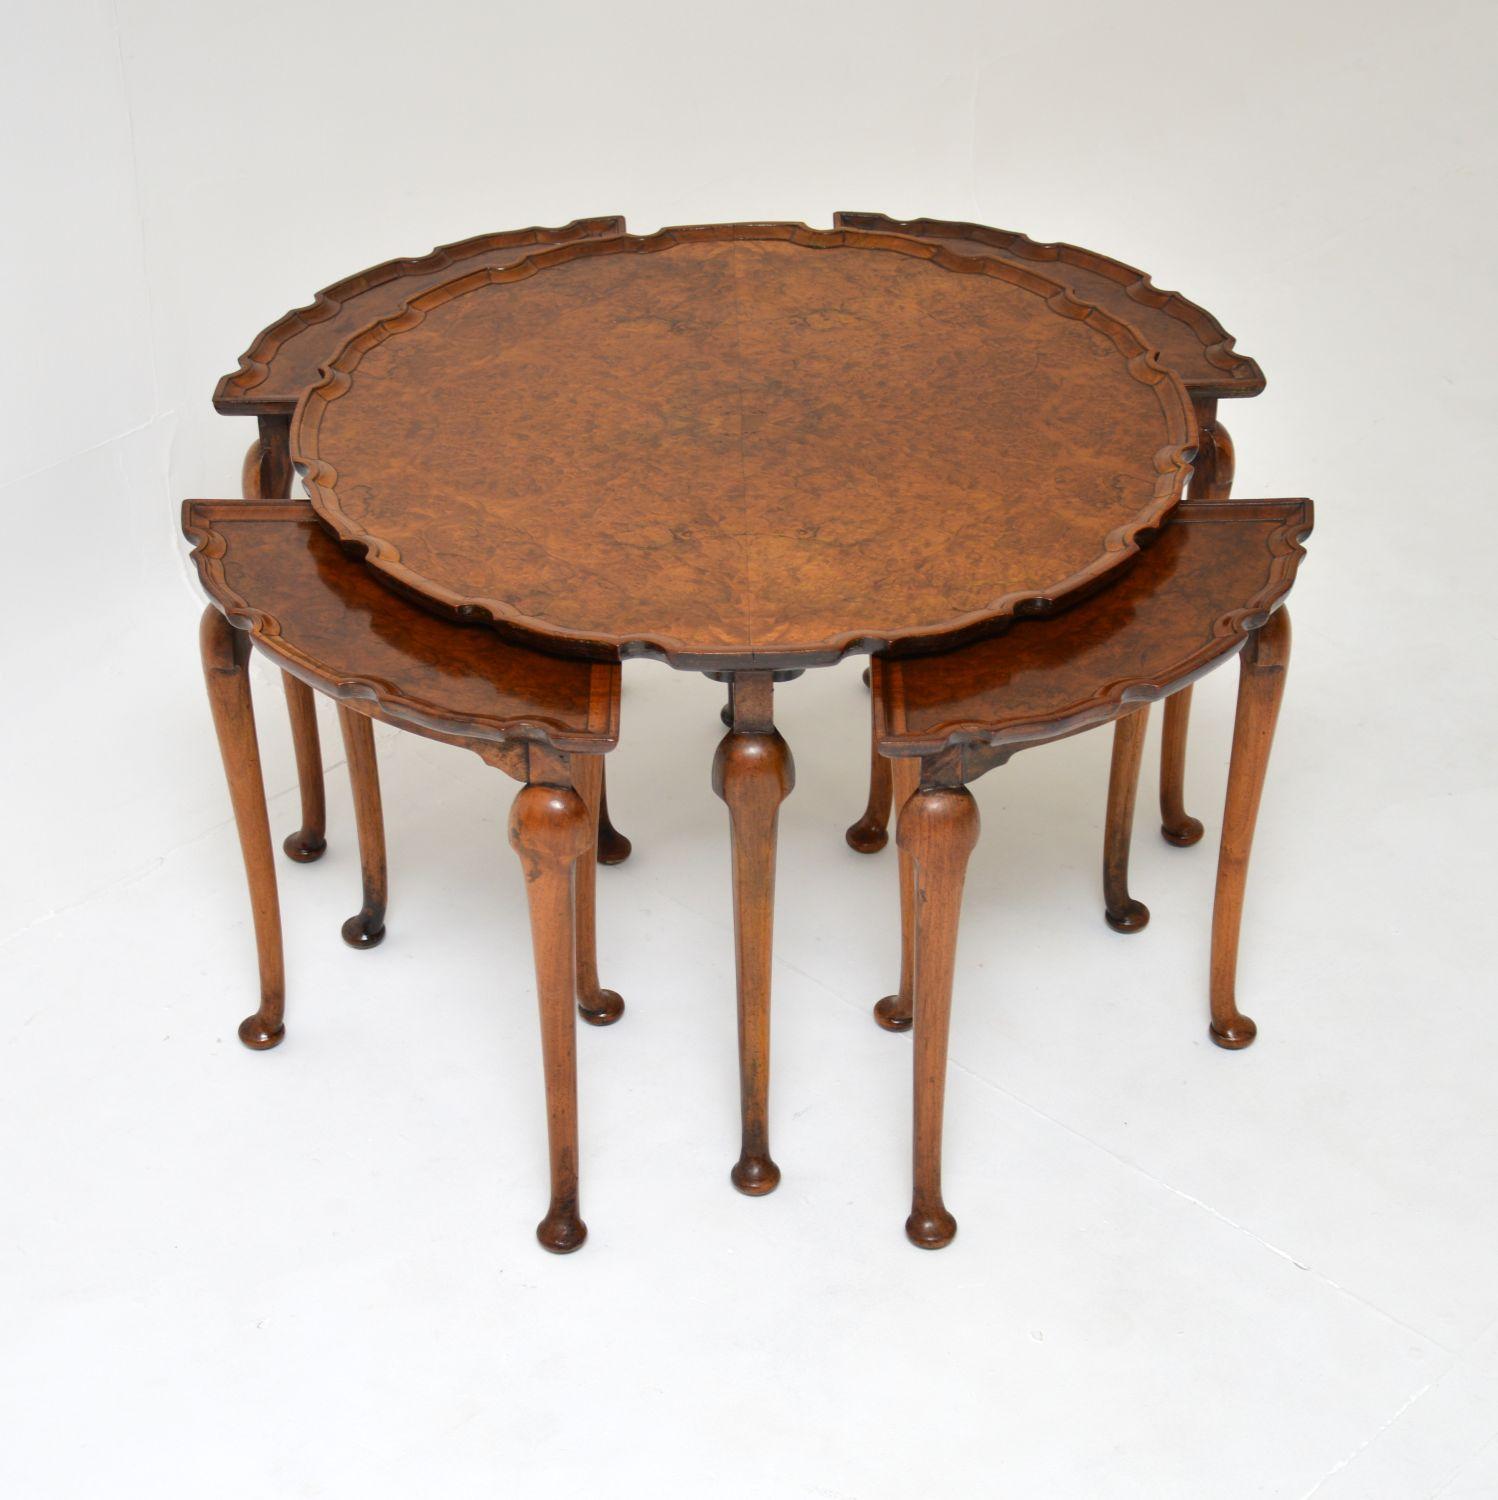 A beautiful and very useful antique burr walnut pie crust nesting coffee table. This was made in England, it dates from around the 1900-1920 period.

It is of superb quality, with a fine, elegant yet sturdy design. The larger circular coffee table